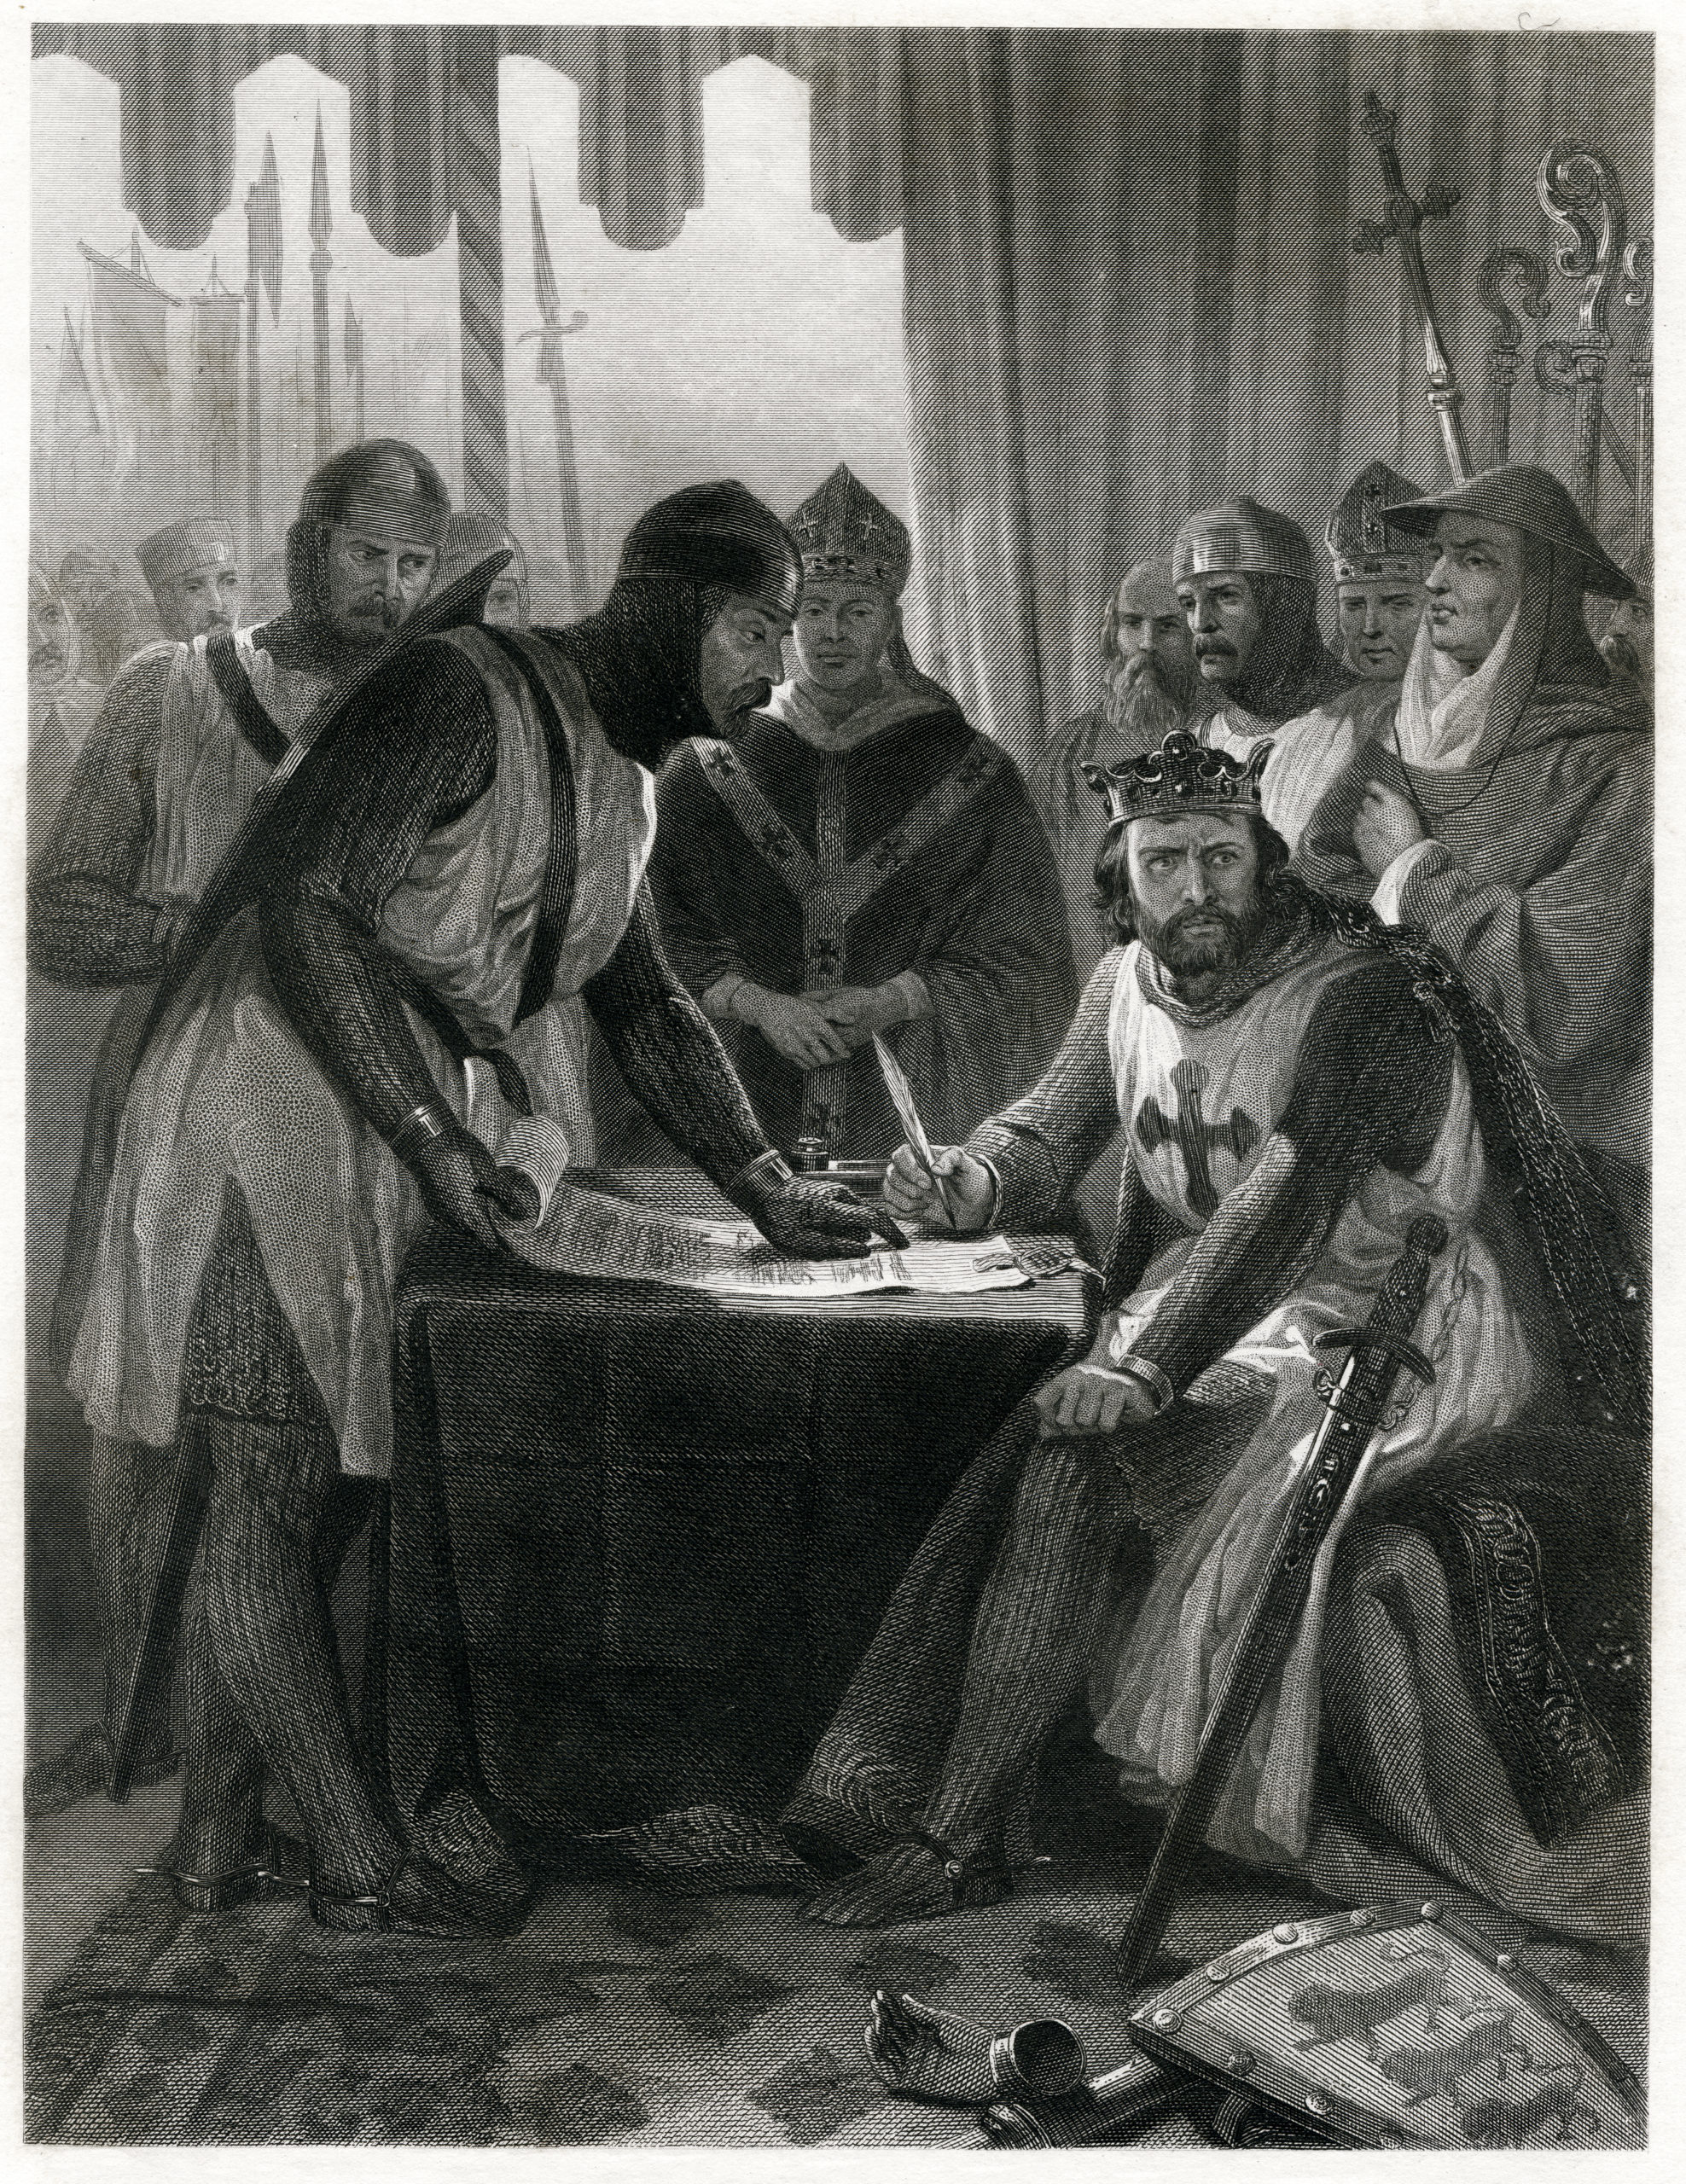 1215-and-all-that-the-fight-for-the-magna-carta